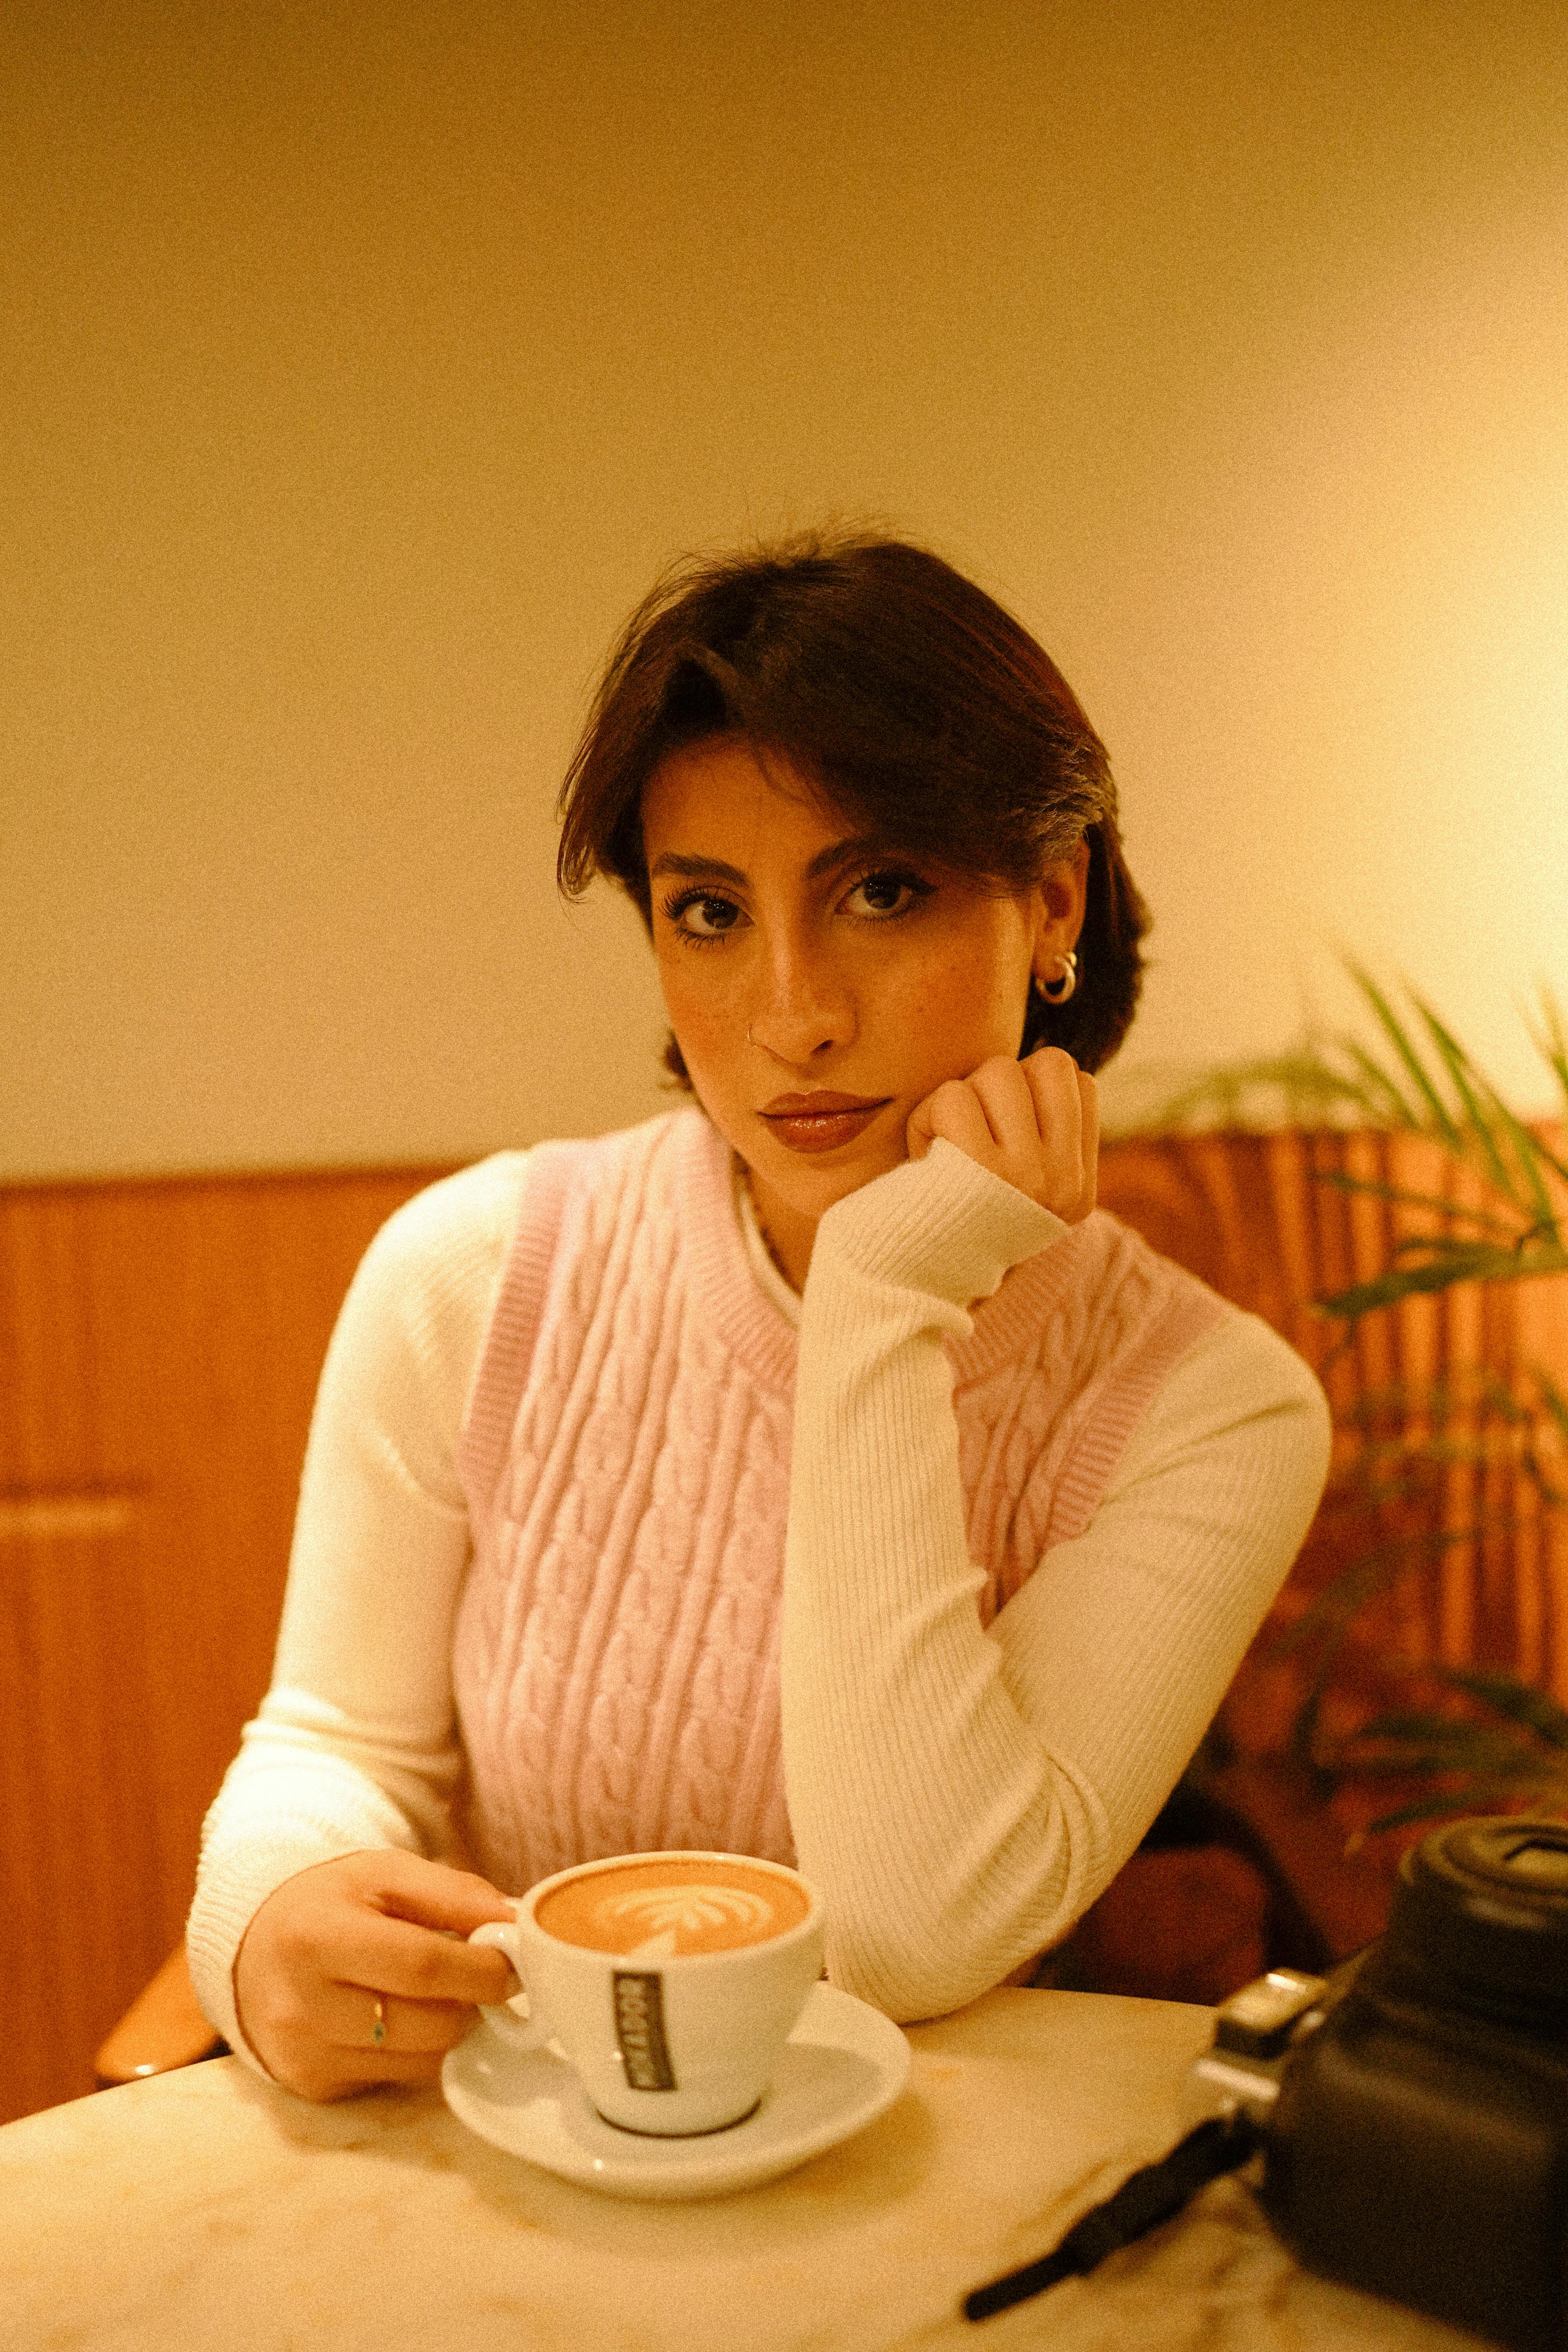 A woman looking unimpressed while having coffee | Source: Pexels